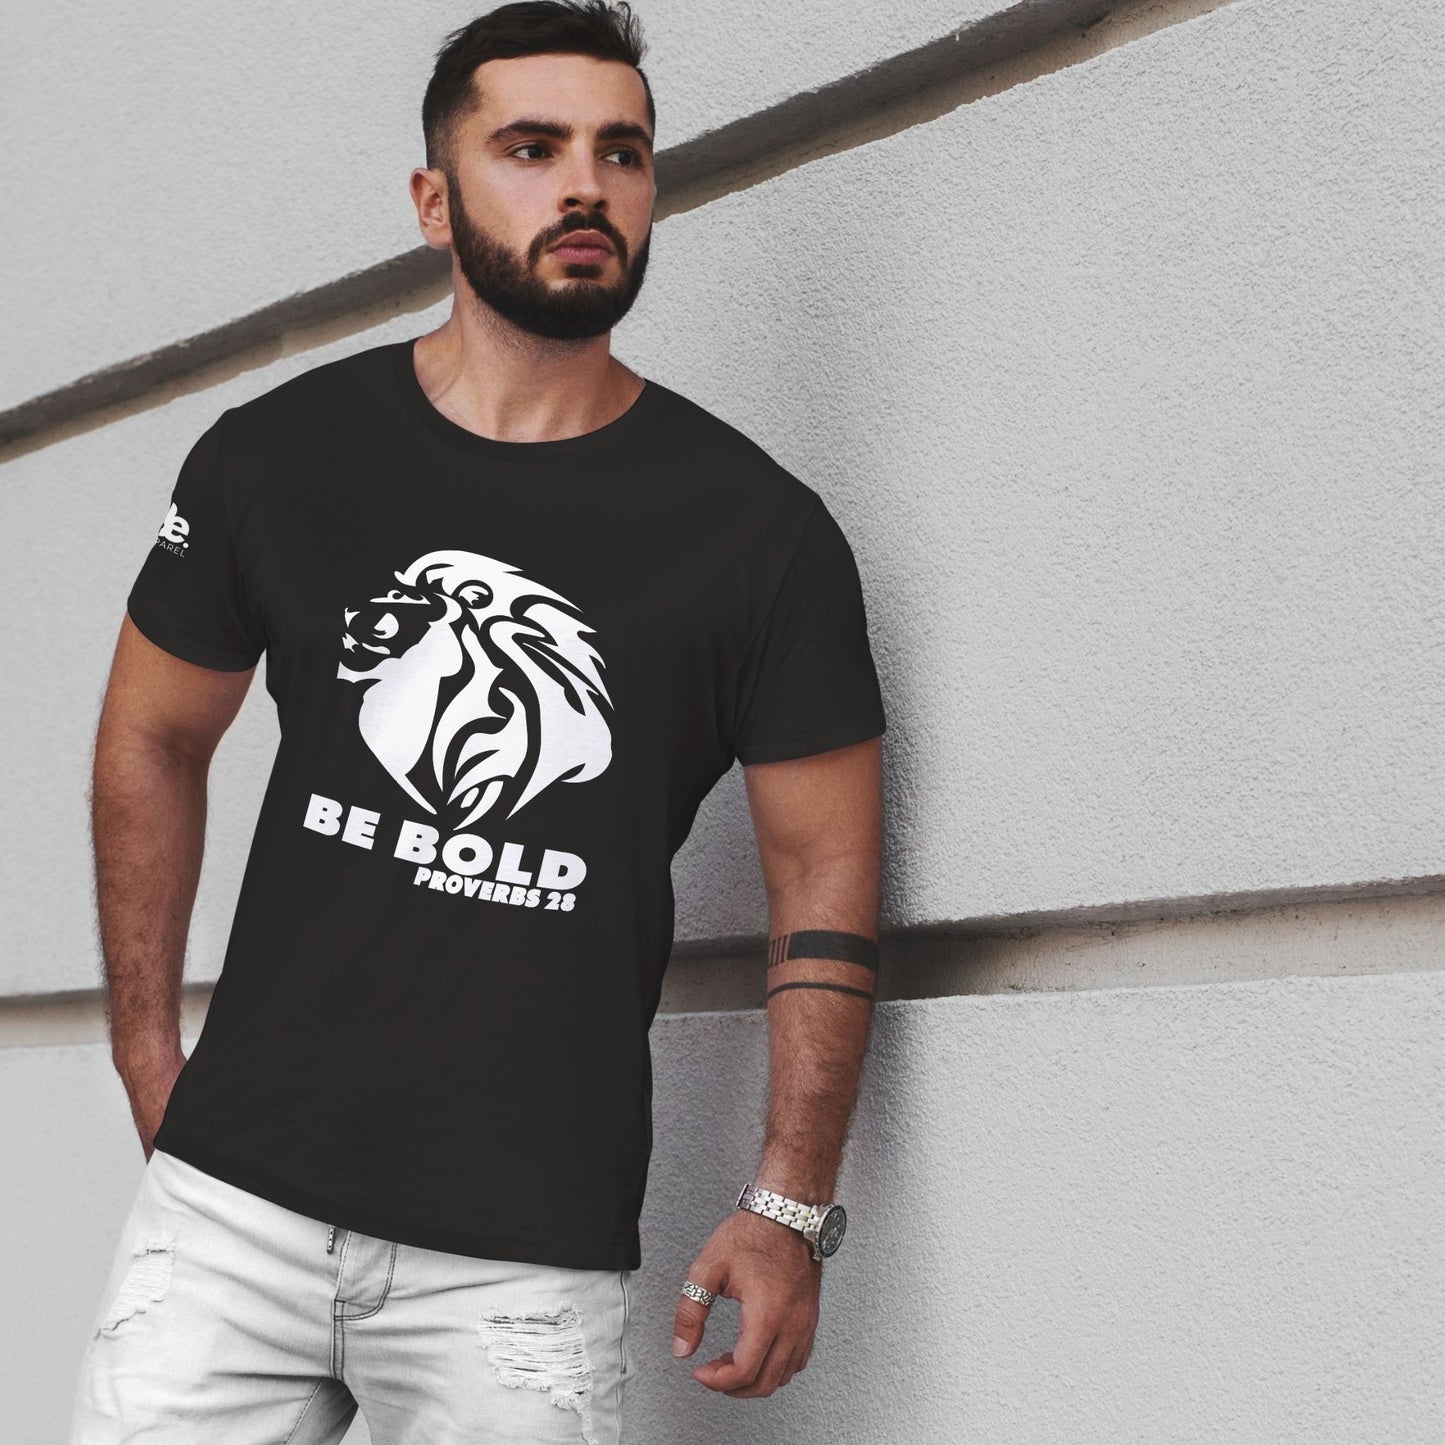 BE BOLD - Black Tee (Limited Edition)